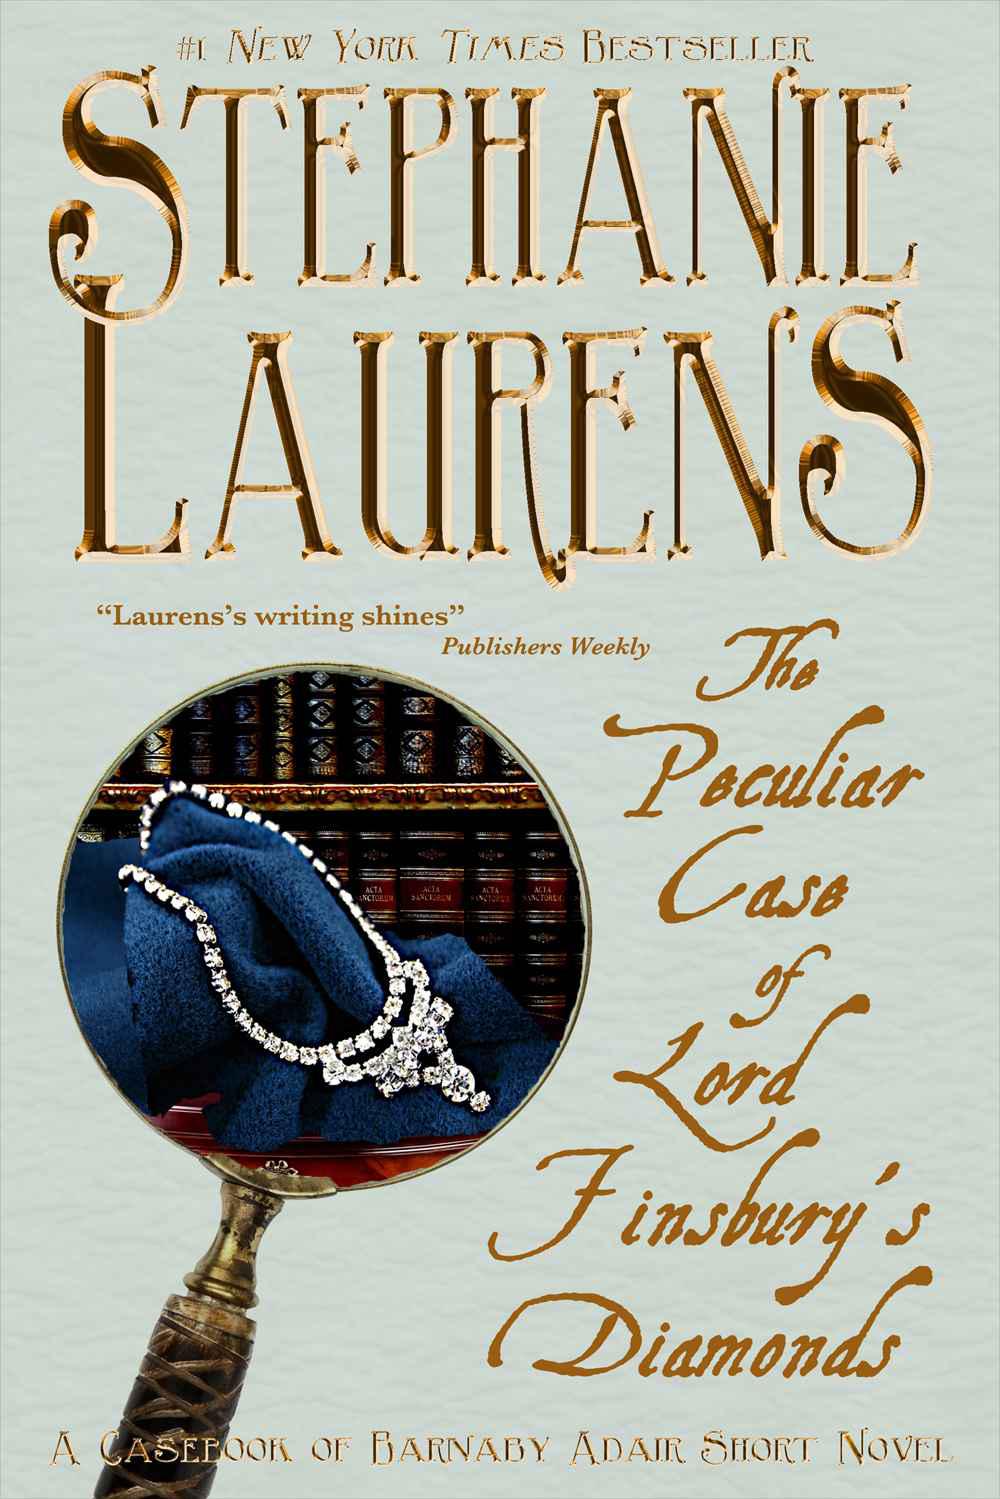 The Peculiar Case of Lord Finsbury's Diamonds: A Casebook of Barnaby Adair Short Novel (The Casebook of Barnaby Adair) by Stephanie Laurens